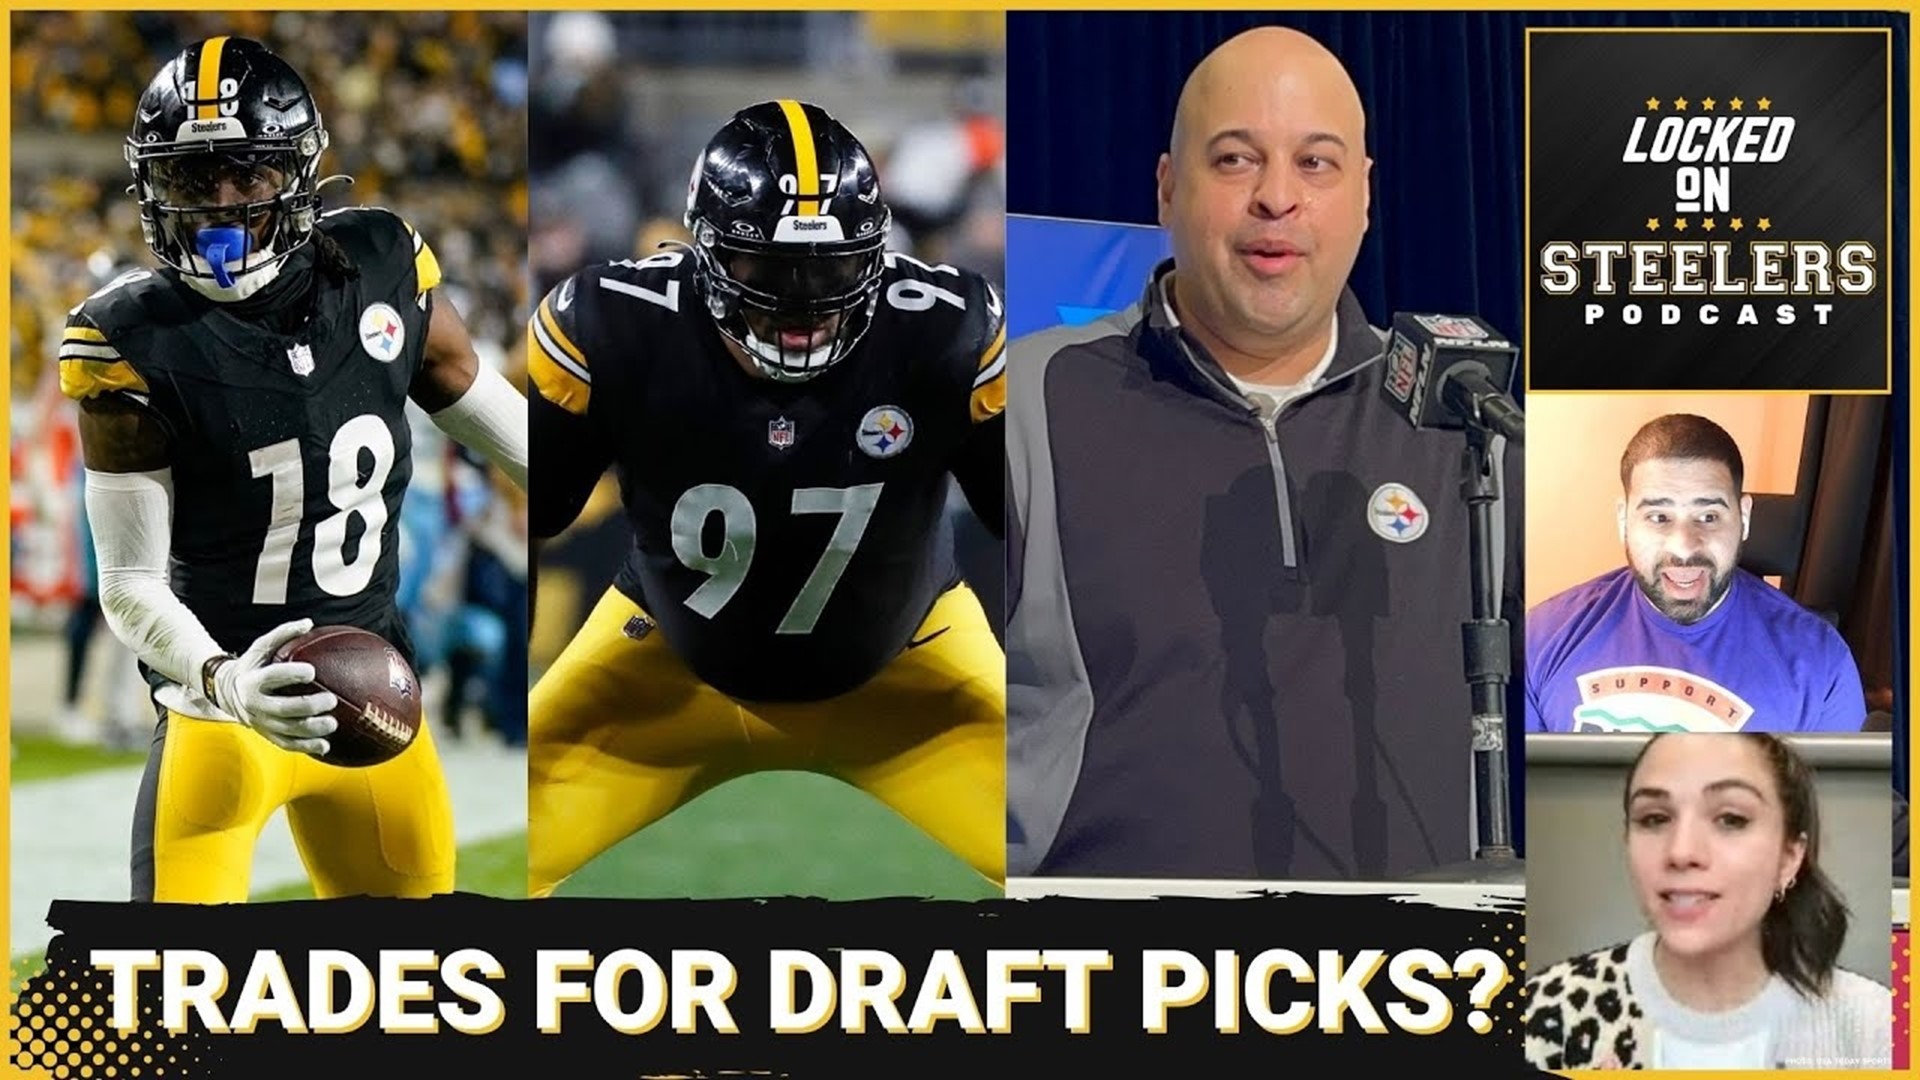 The Pittsburgh Steelers could be in the NFL trade market to get more NFL Draft picks. But who are the best options?